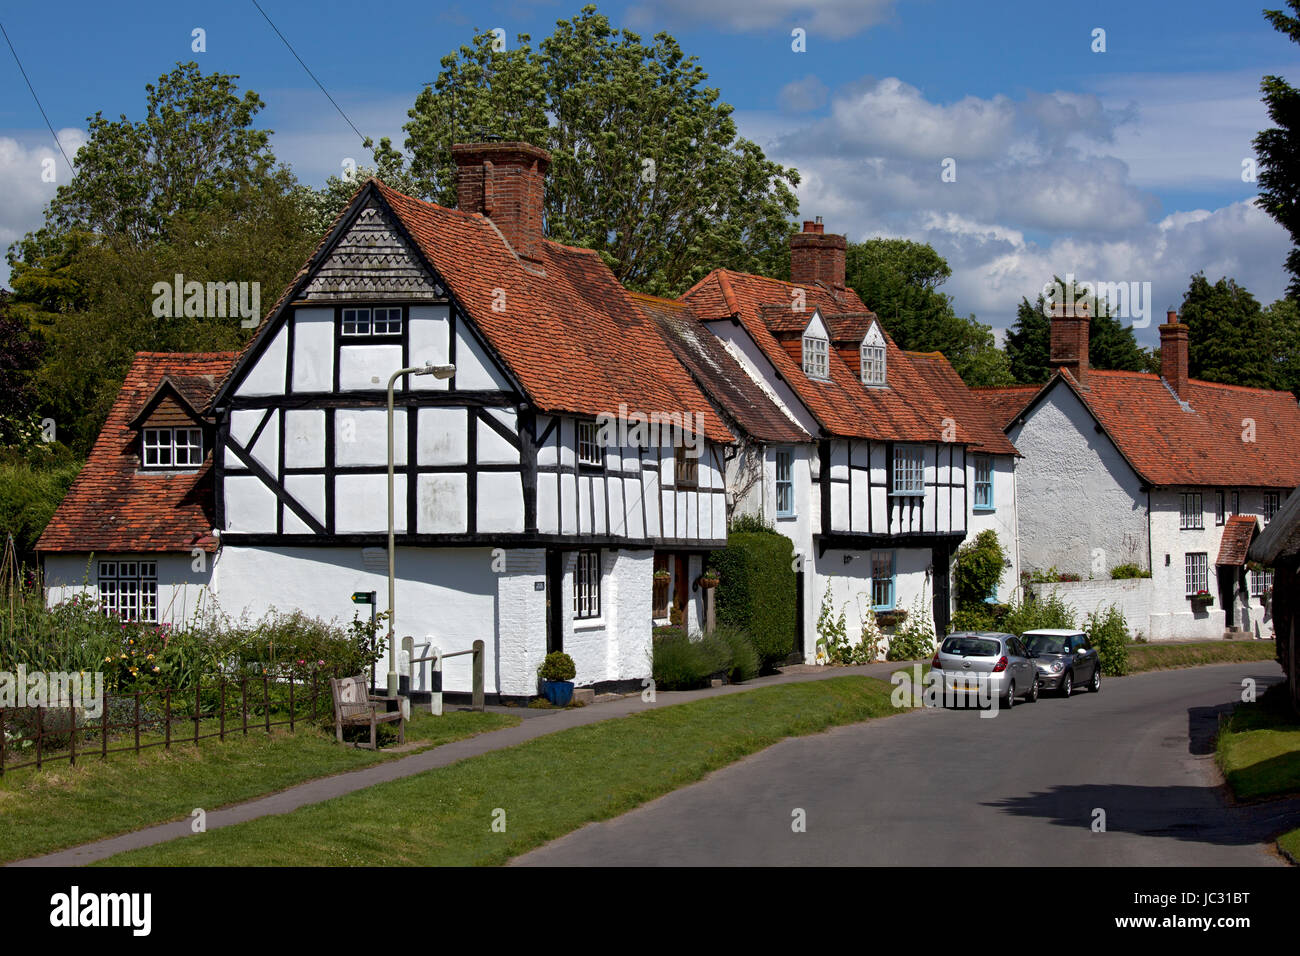 Village high street scene in East Hagbourne,Oxfordshire,England Stock Photo